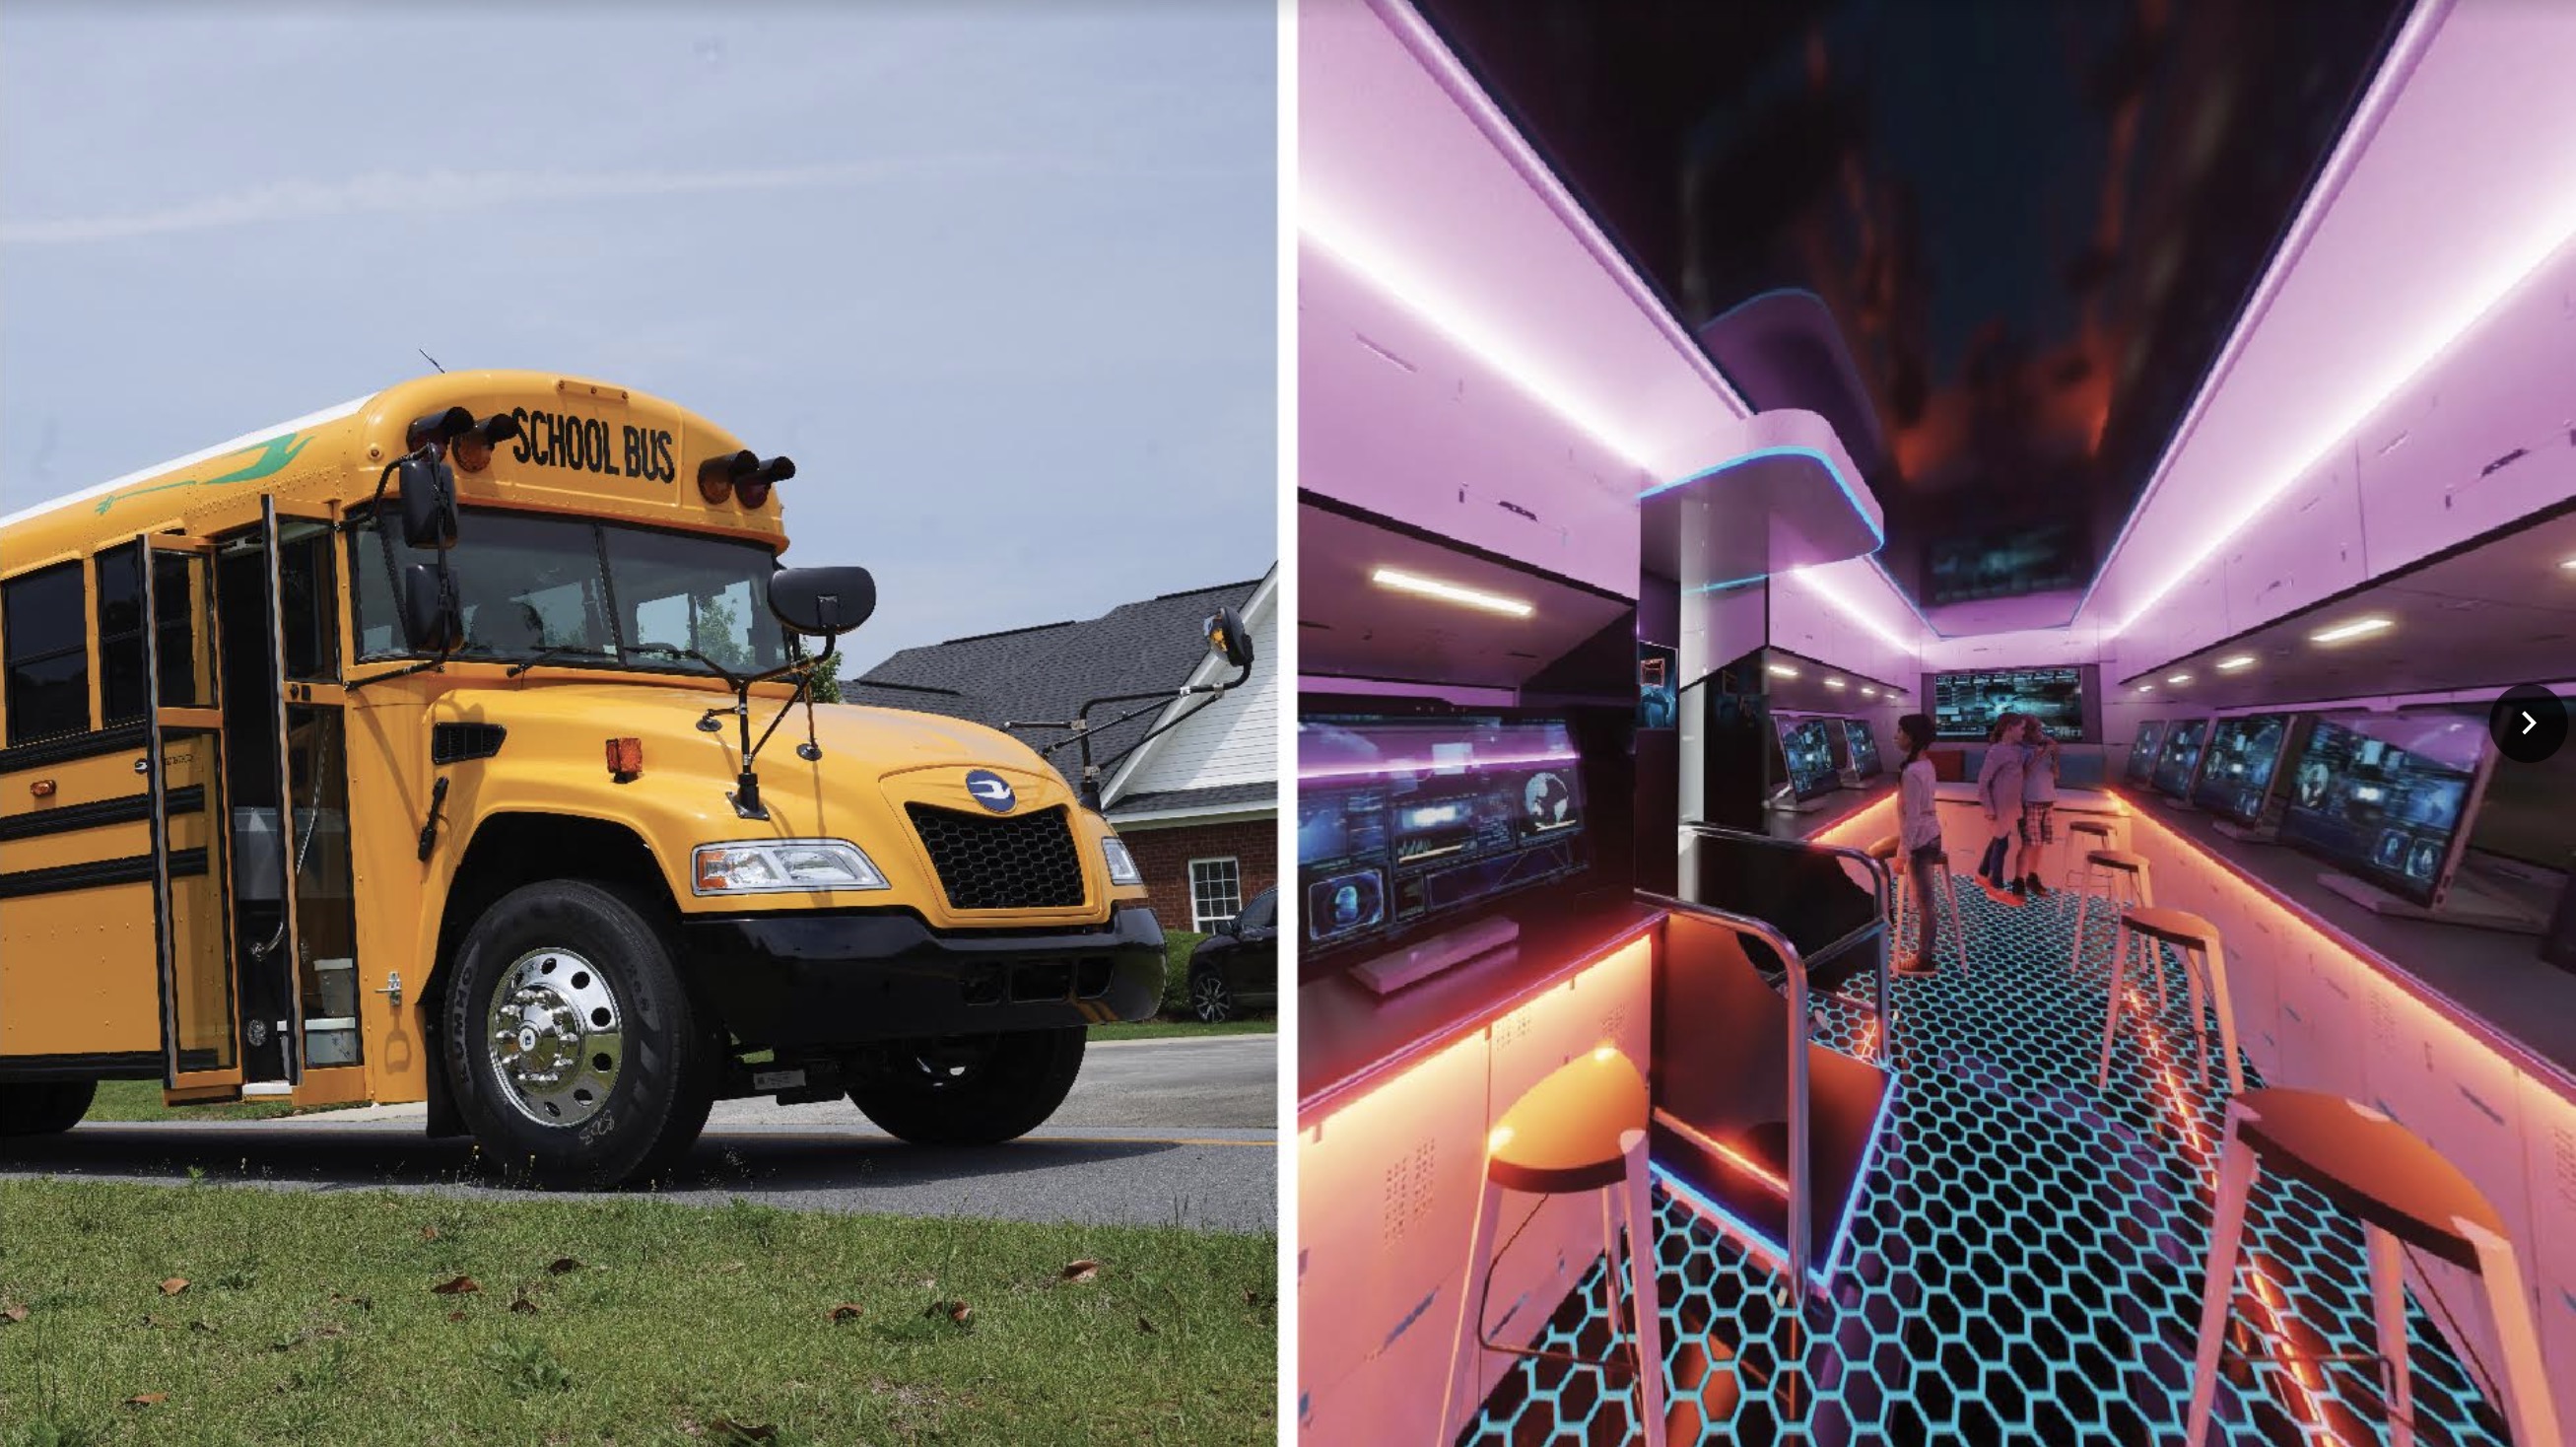 Blue Bird donated an all-electric, zero-emission school bus to the Jerome Bettis Bus Stops Here Foundation in Pittsburgh, Pa. The bus will be turned into a mobile computer lab to expand the foundation’s digital literacy community programs. 